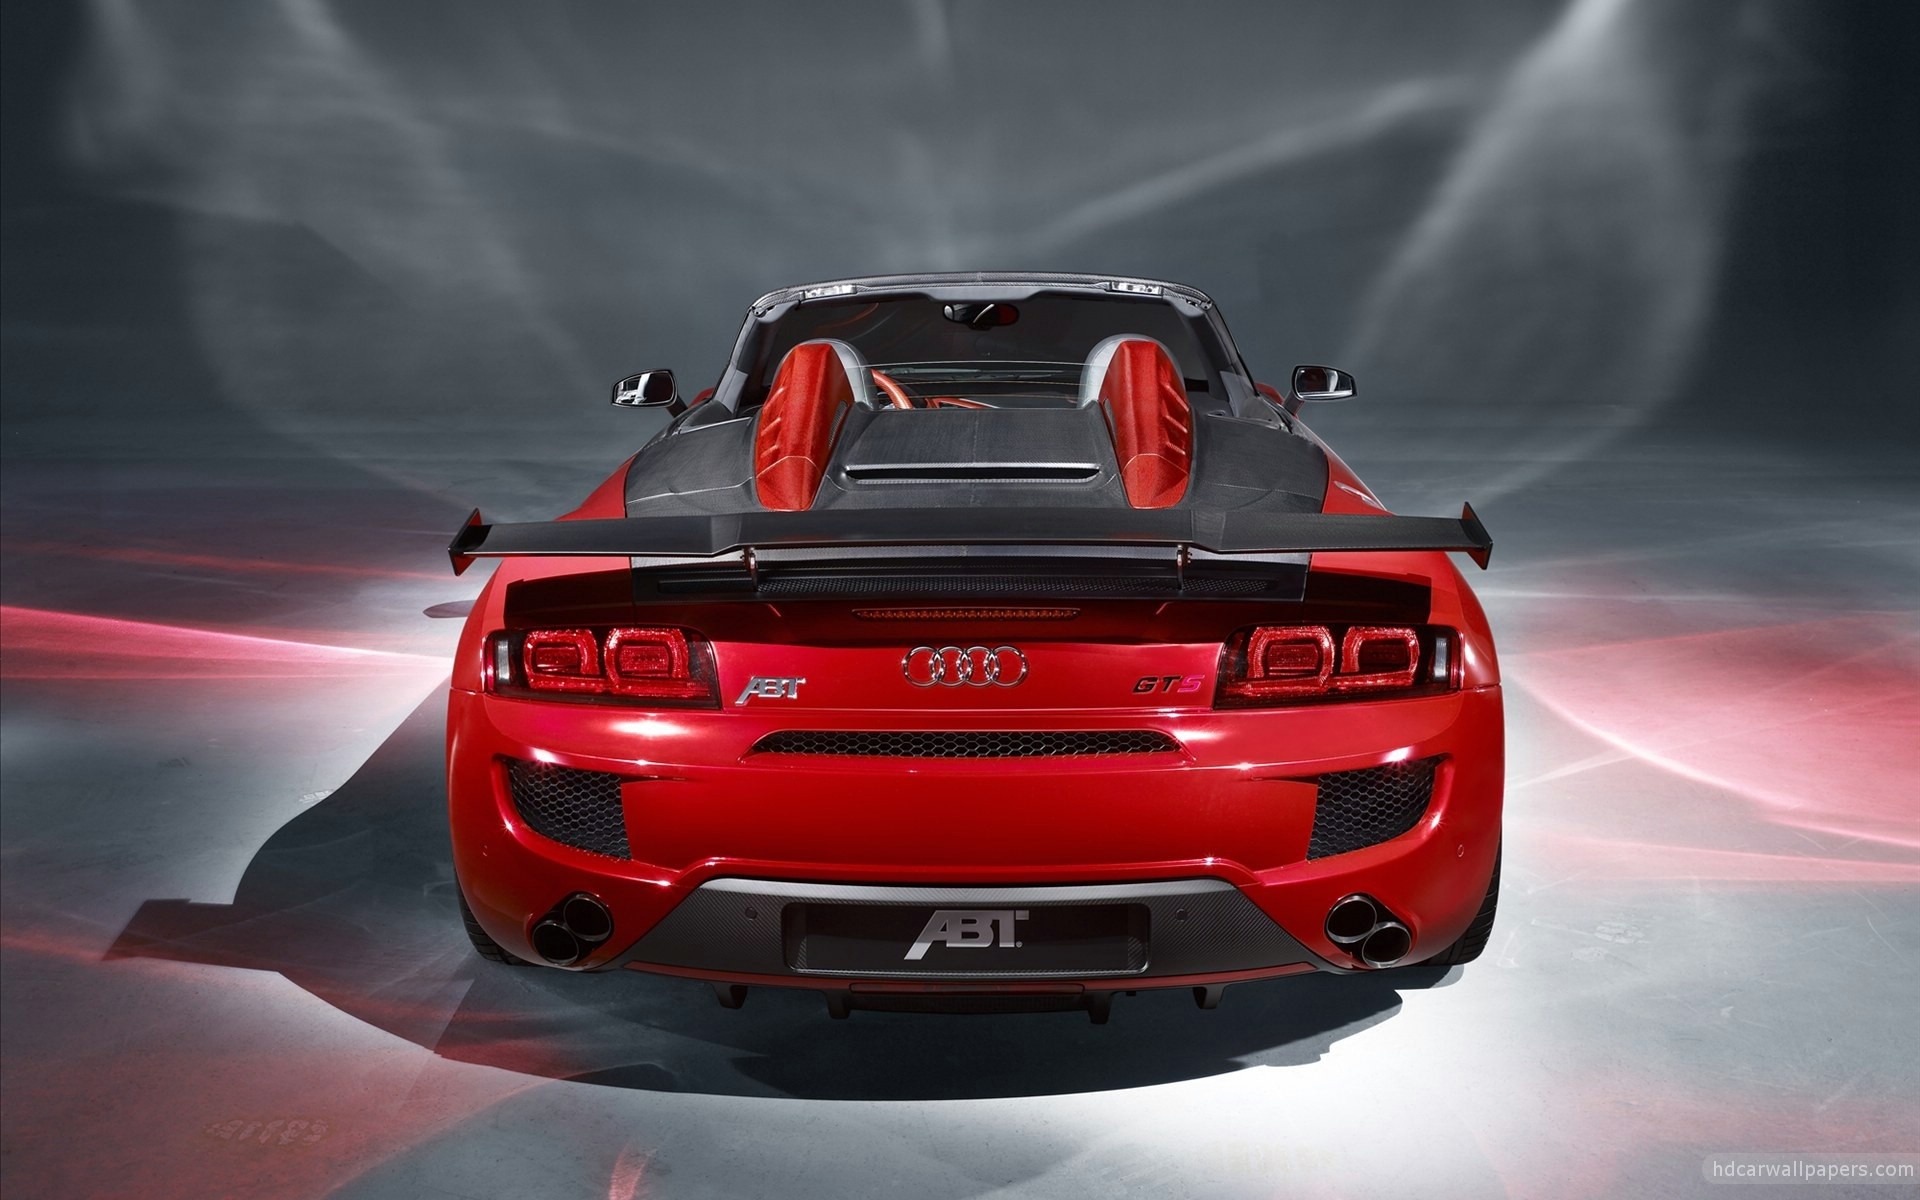 cars, Drive, Vehicles, Tuning, Convertible, Wheels, Audi, R8, Sports, Cars, Abt, Luxury, Sport, Cars, Gts, Speed Wallpaper